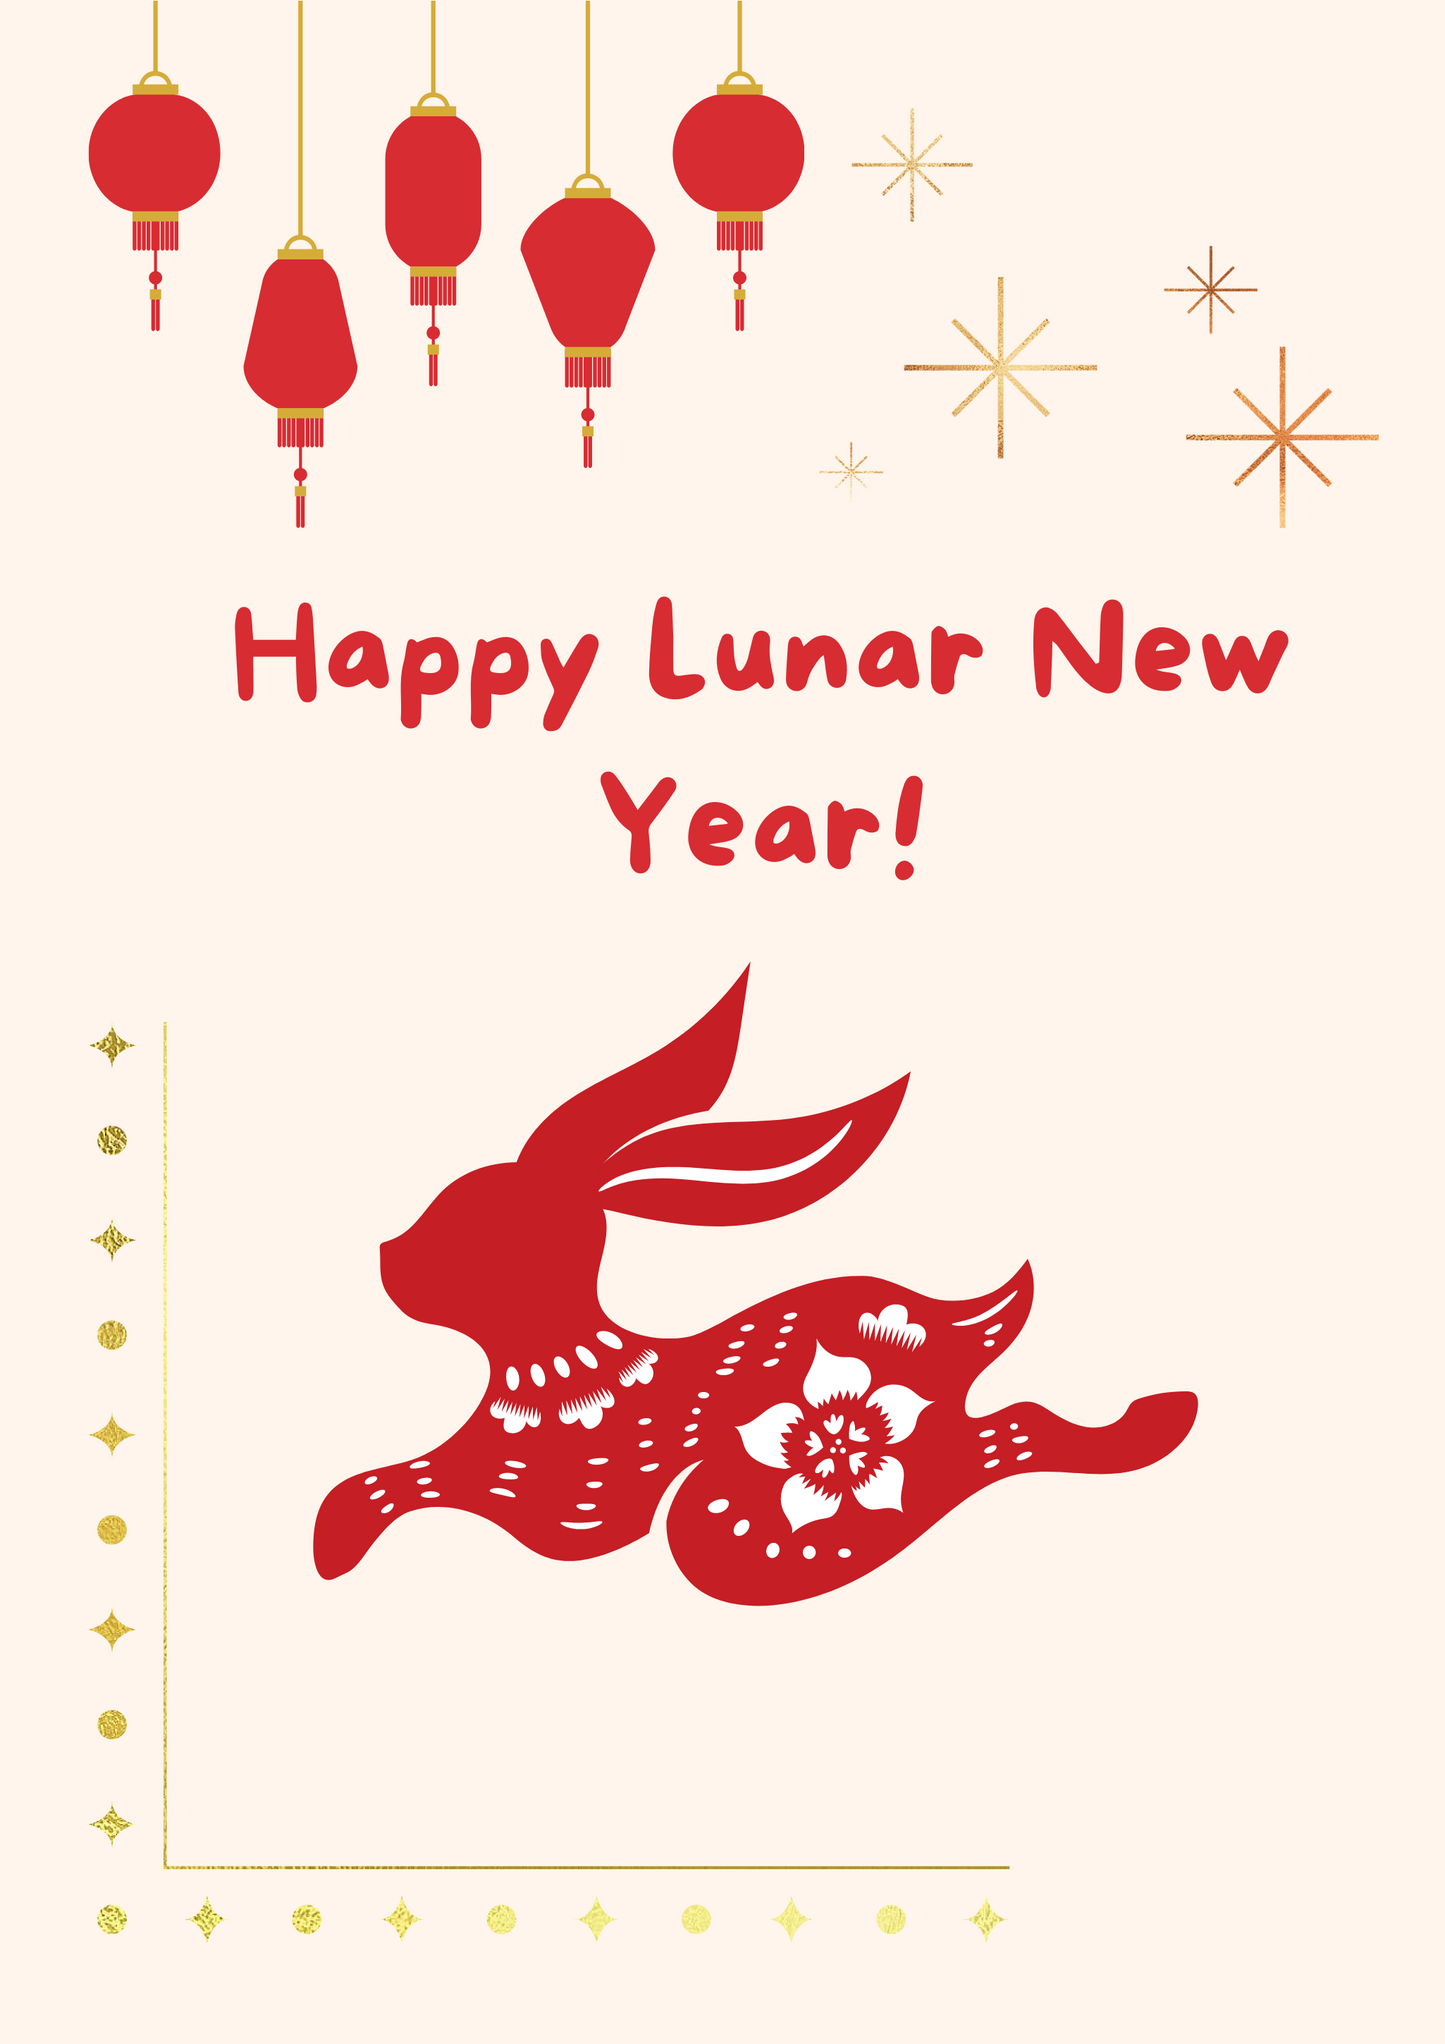 Lunar New Year Leaping Rabbit